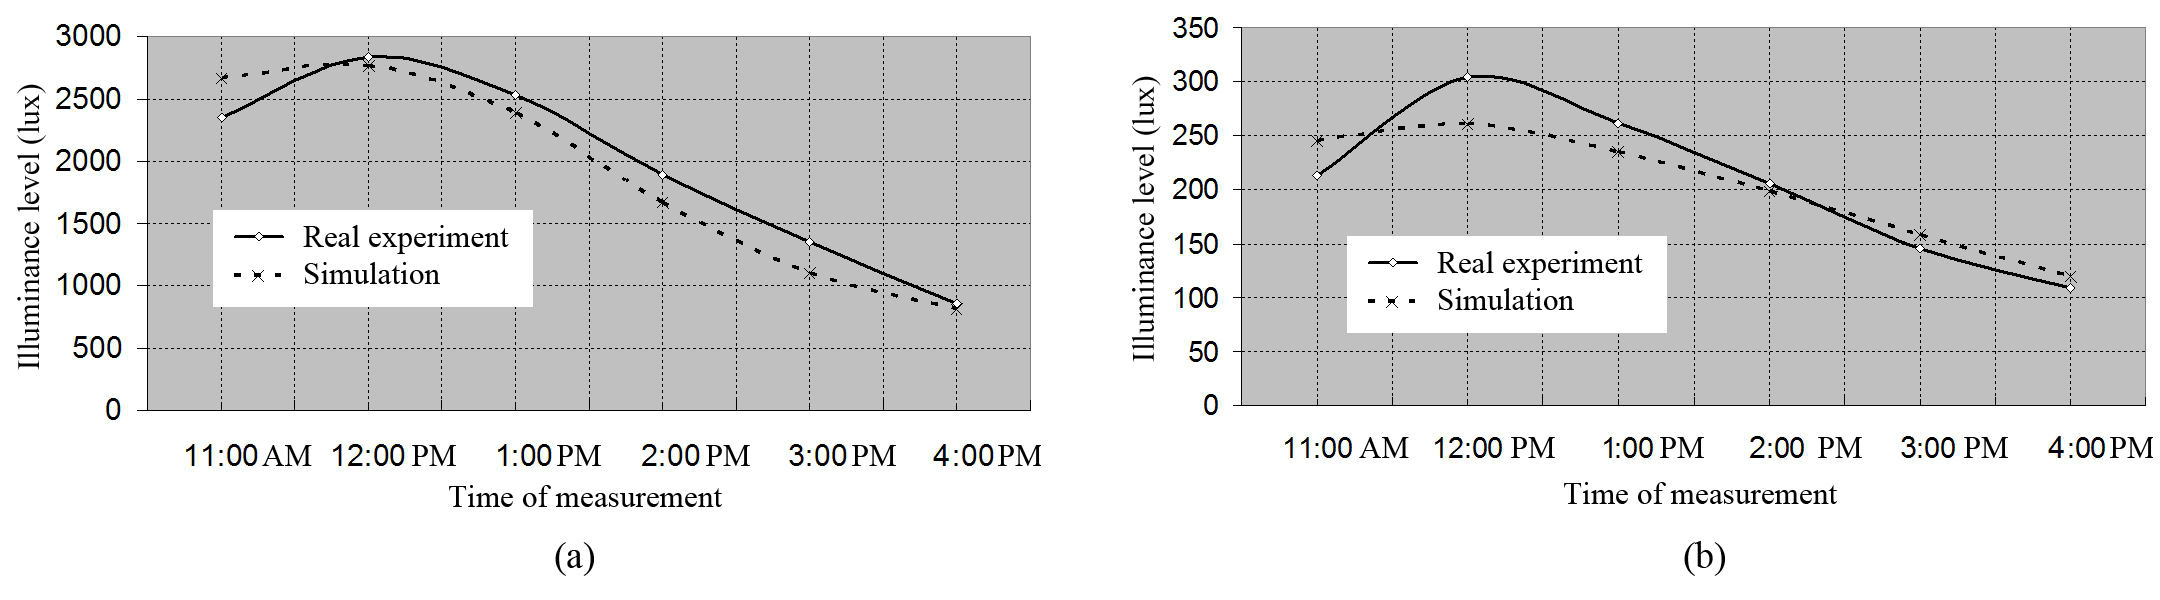 Comparison of experimental and simulation results for a room served by LCP and flat ceiling with ratio (4:5) at (a) 1 m and (b) 7 m from the window.